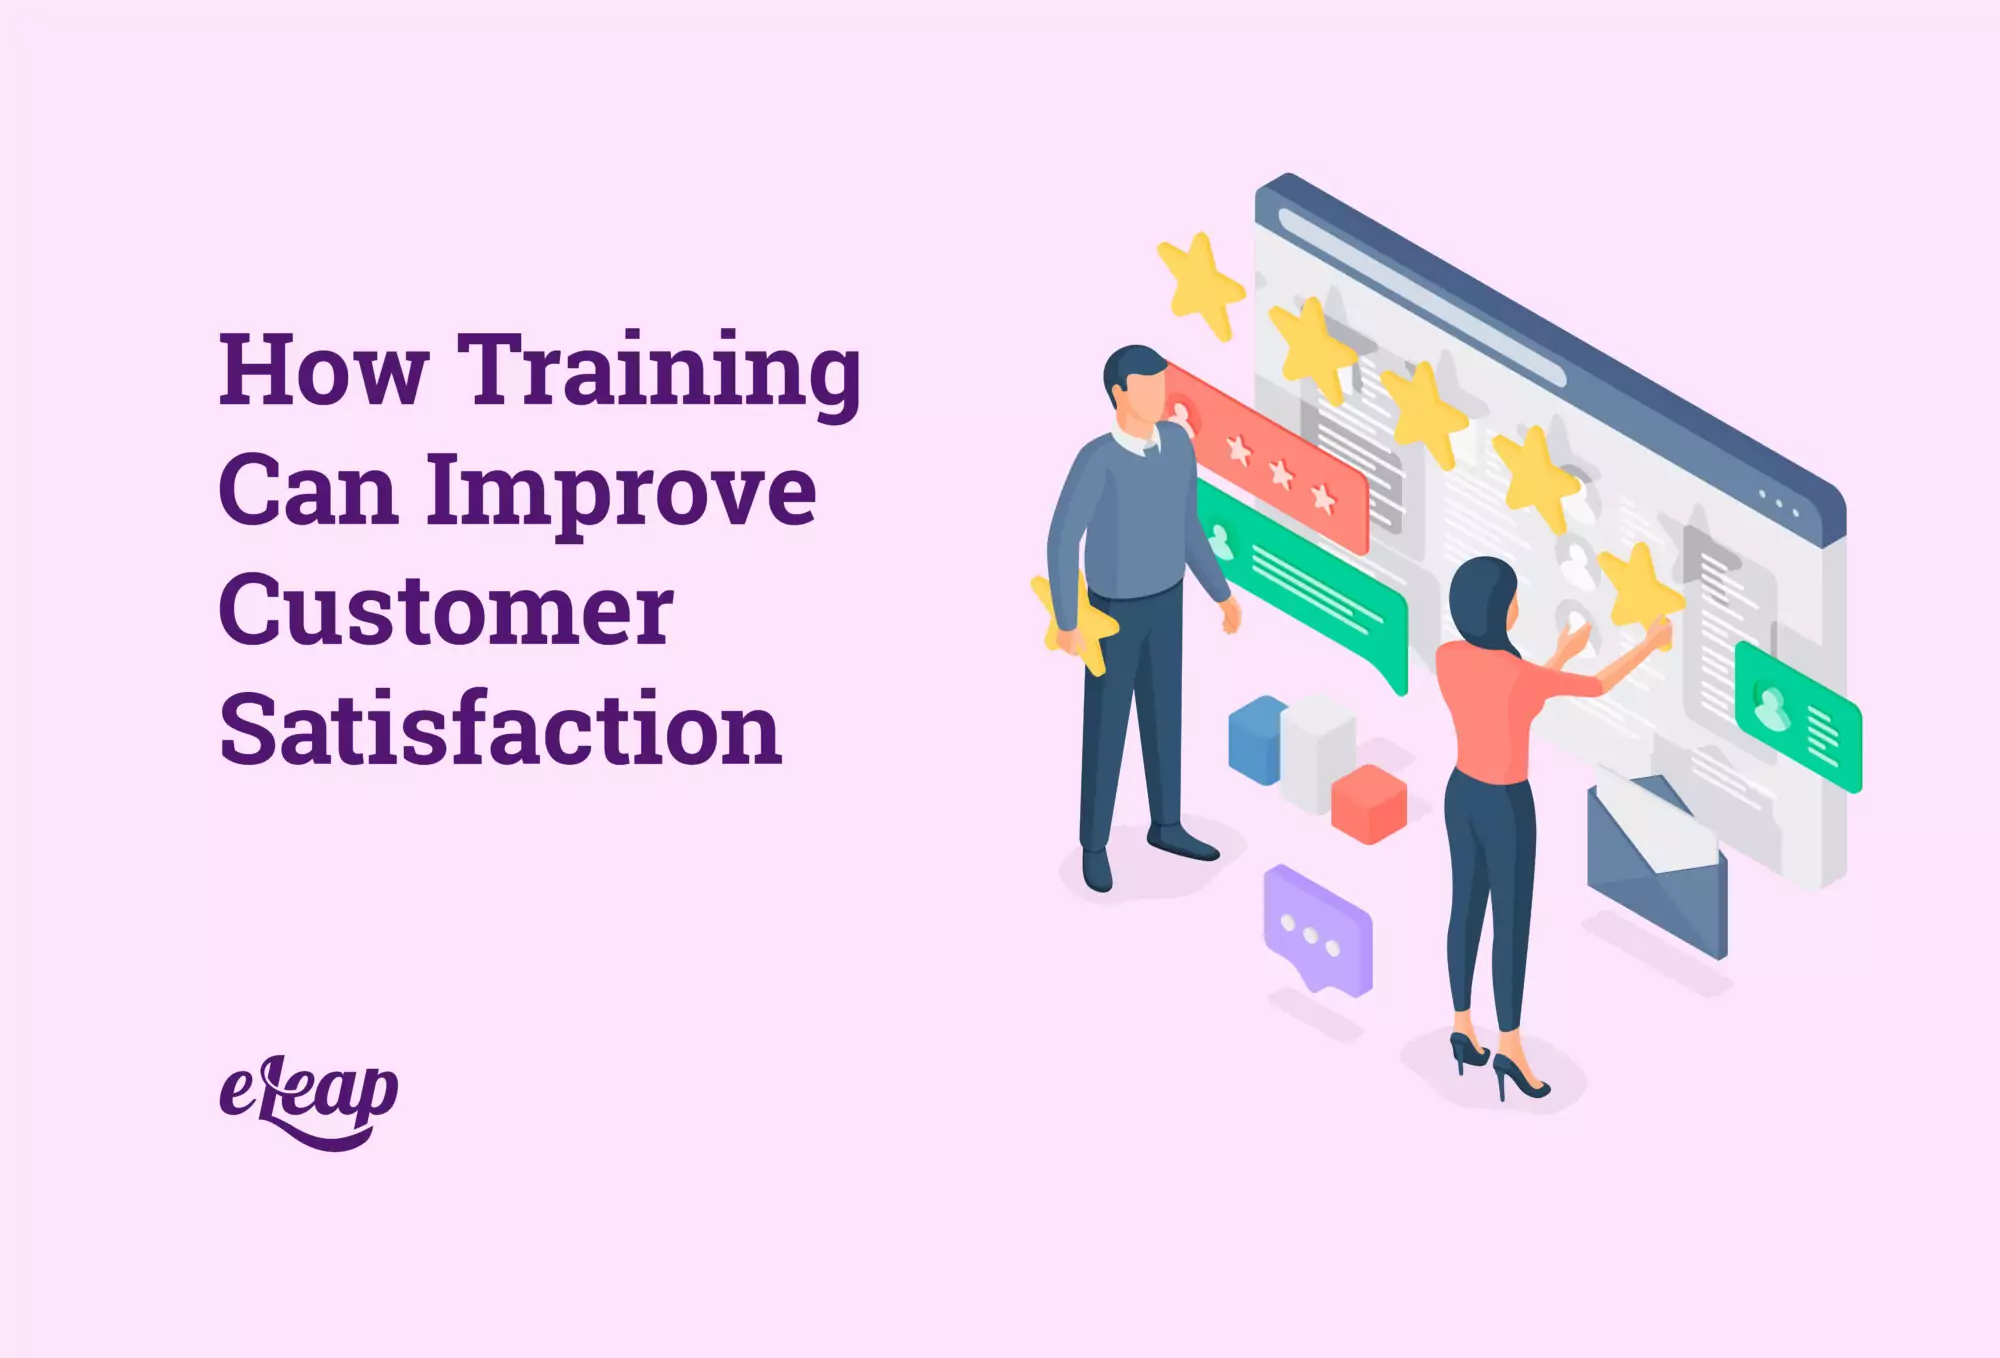 How Training Can Improve Customer Satisfaction